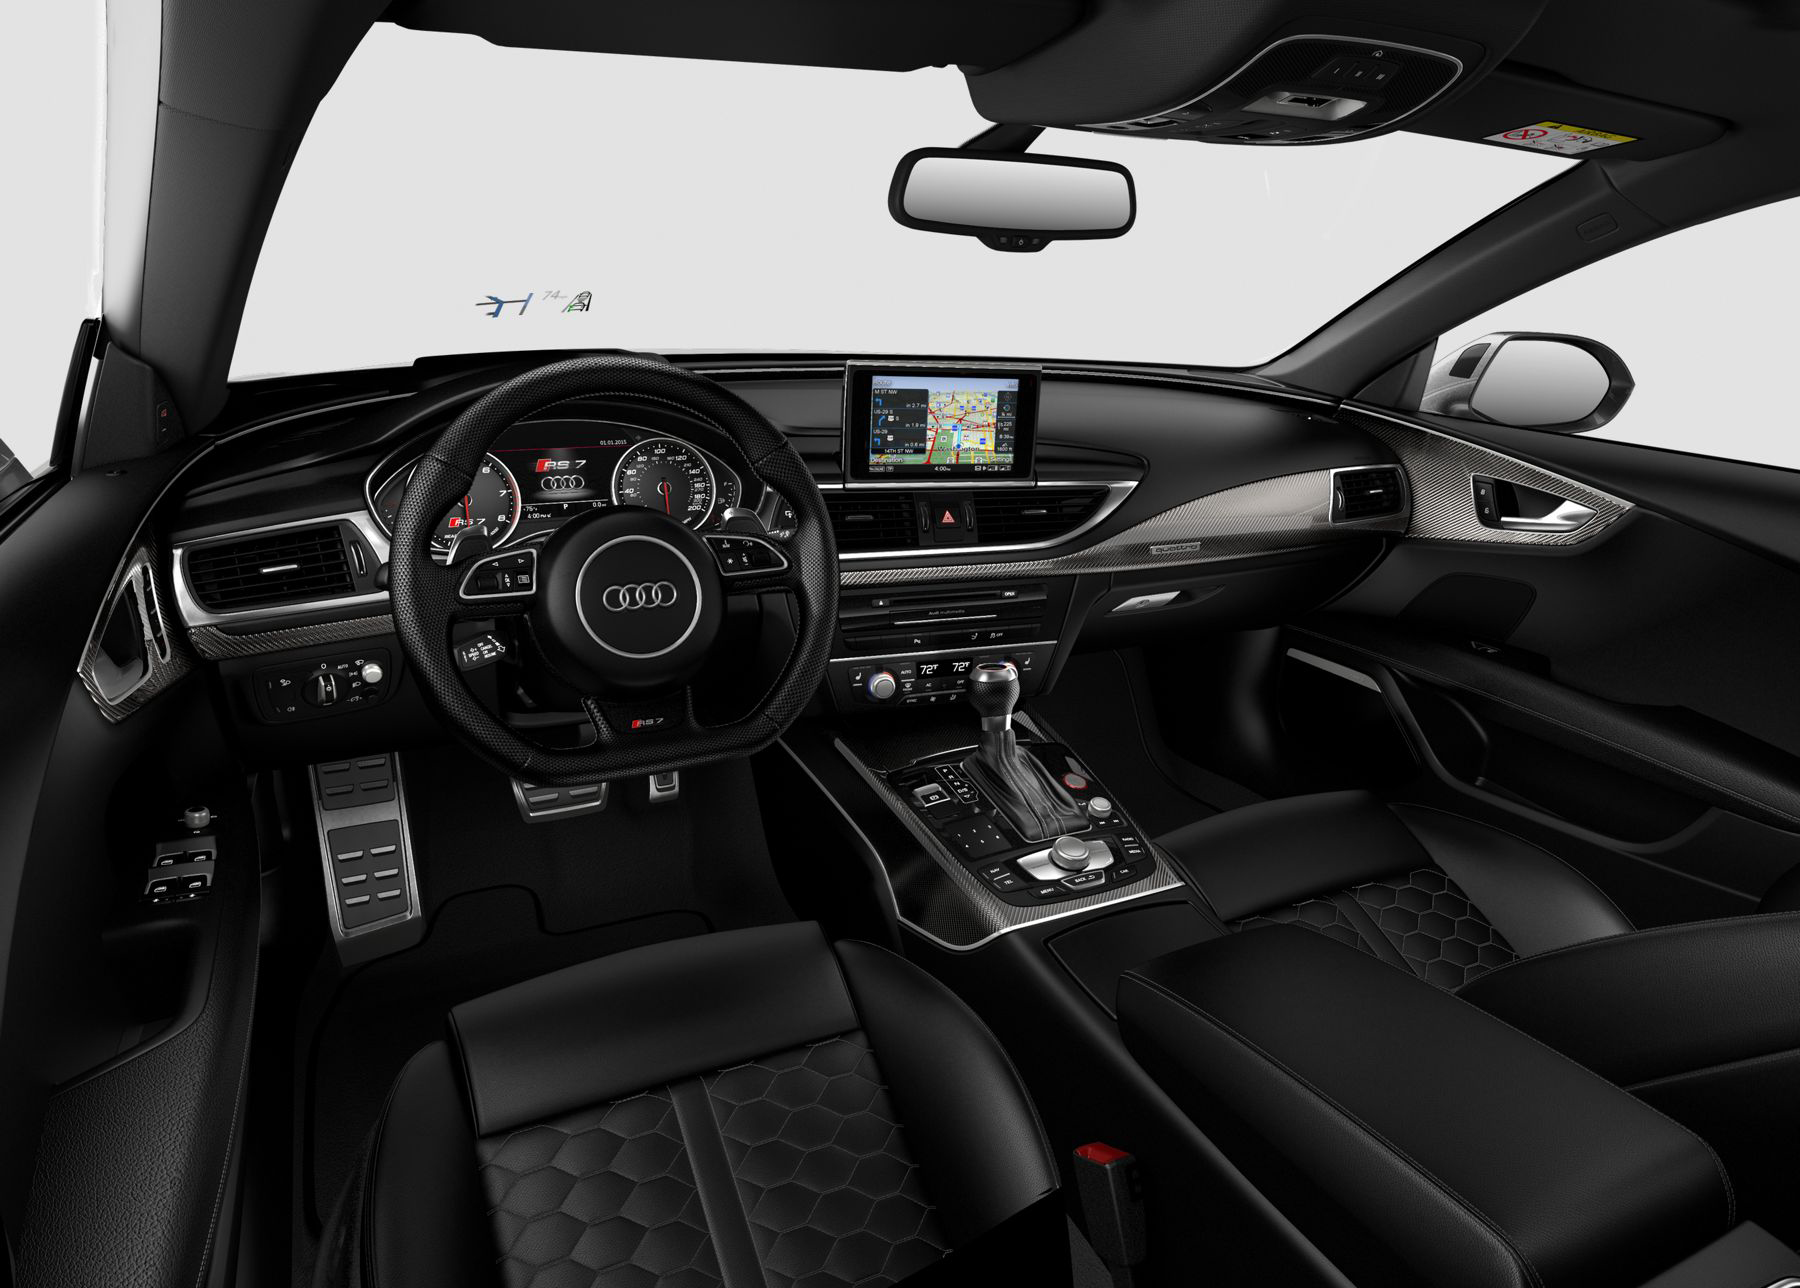 Audi Rs7 Performance 2017 Interior Image Gallery Pictures